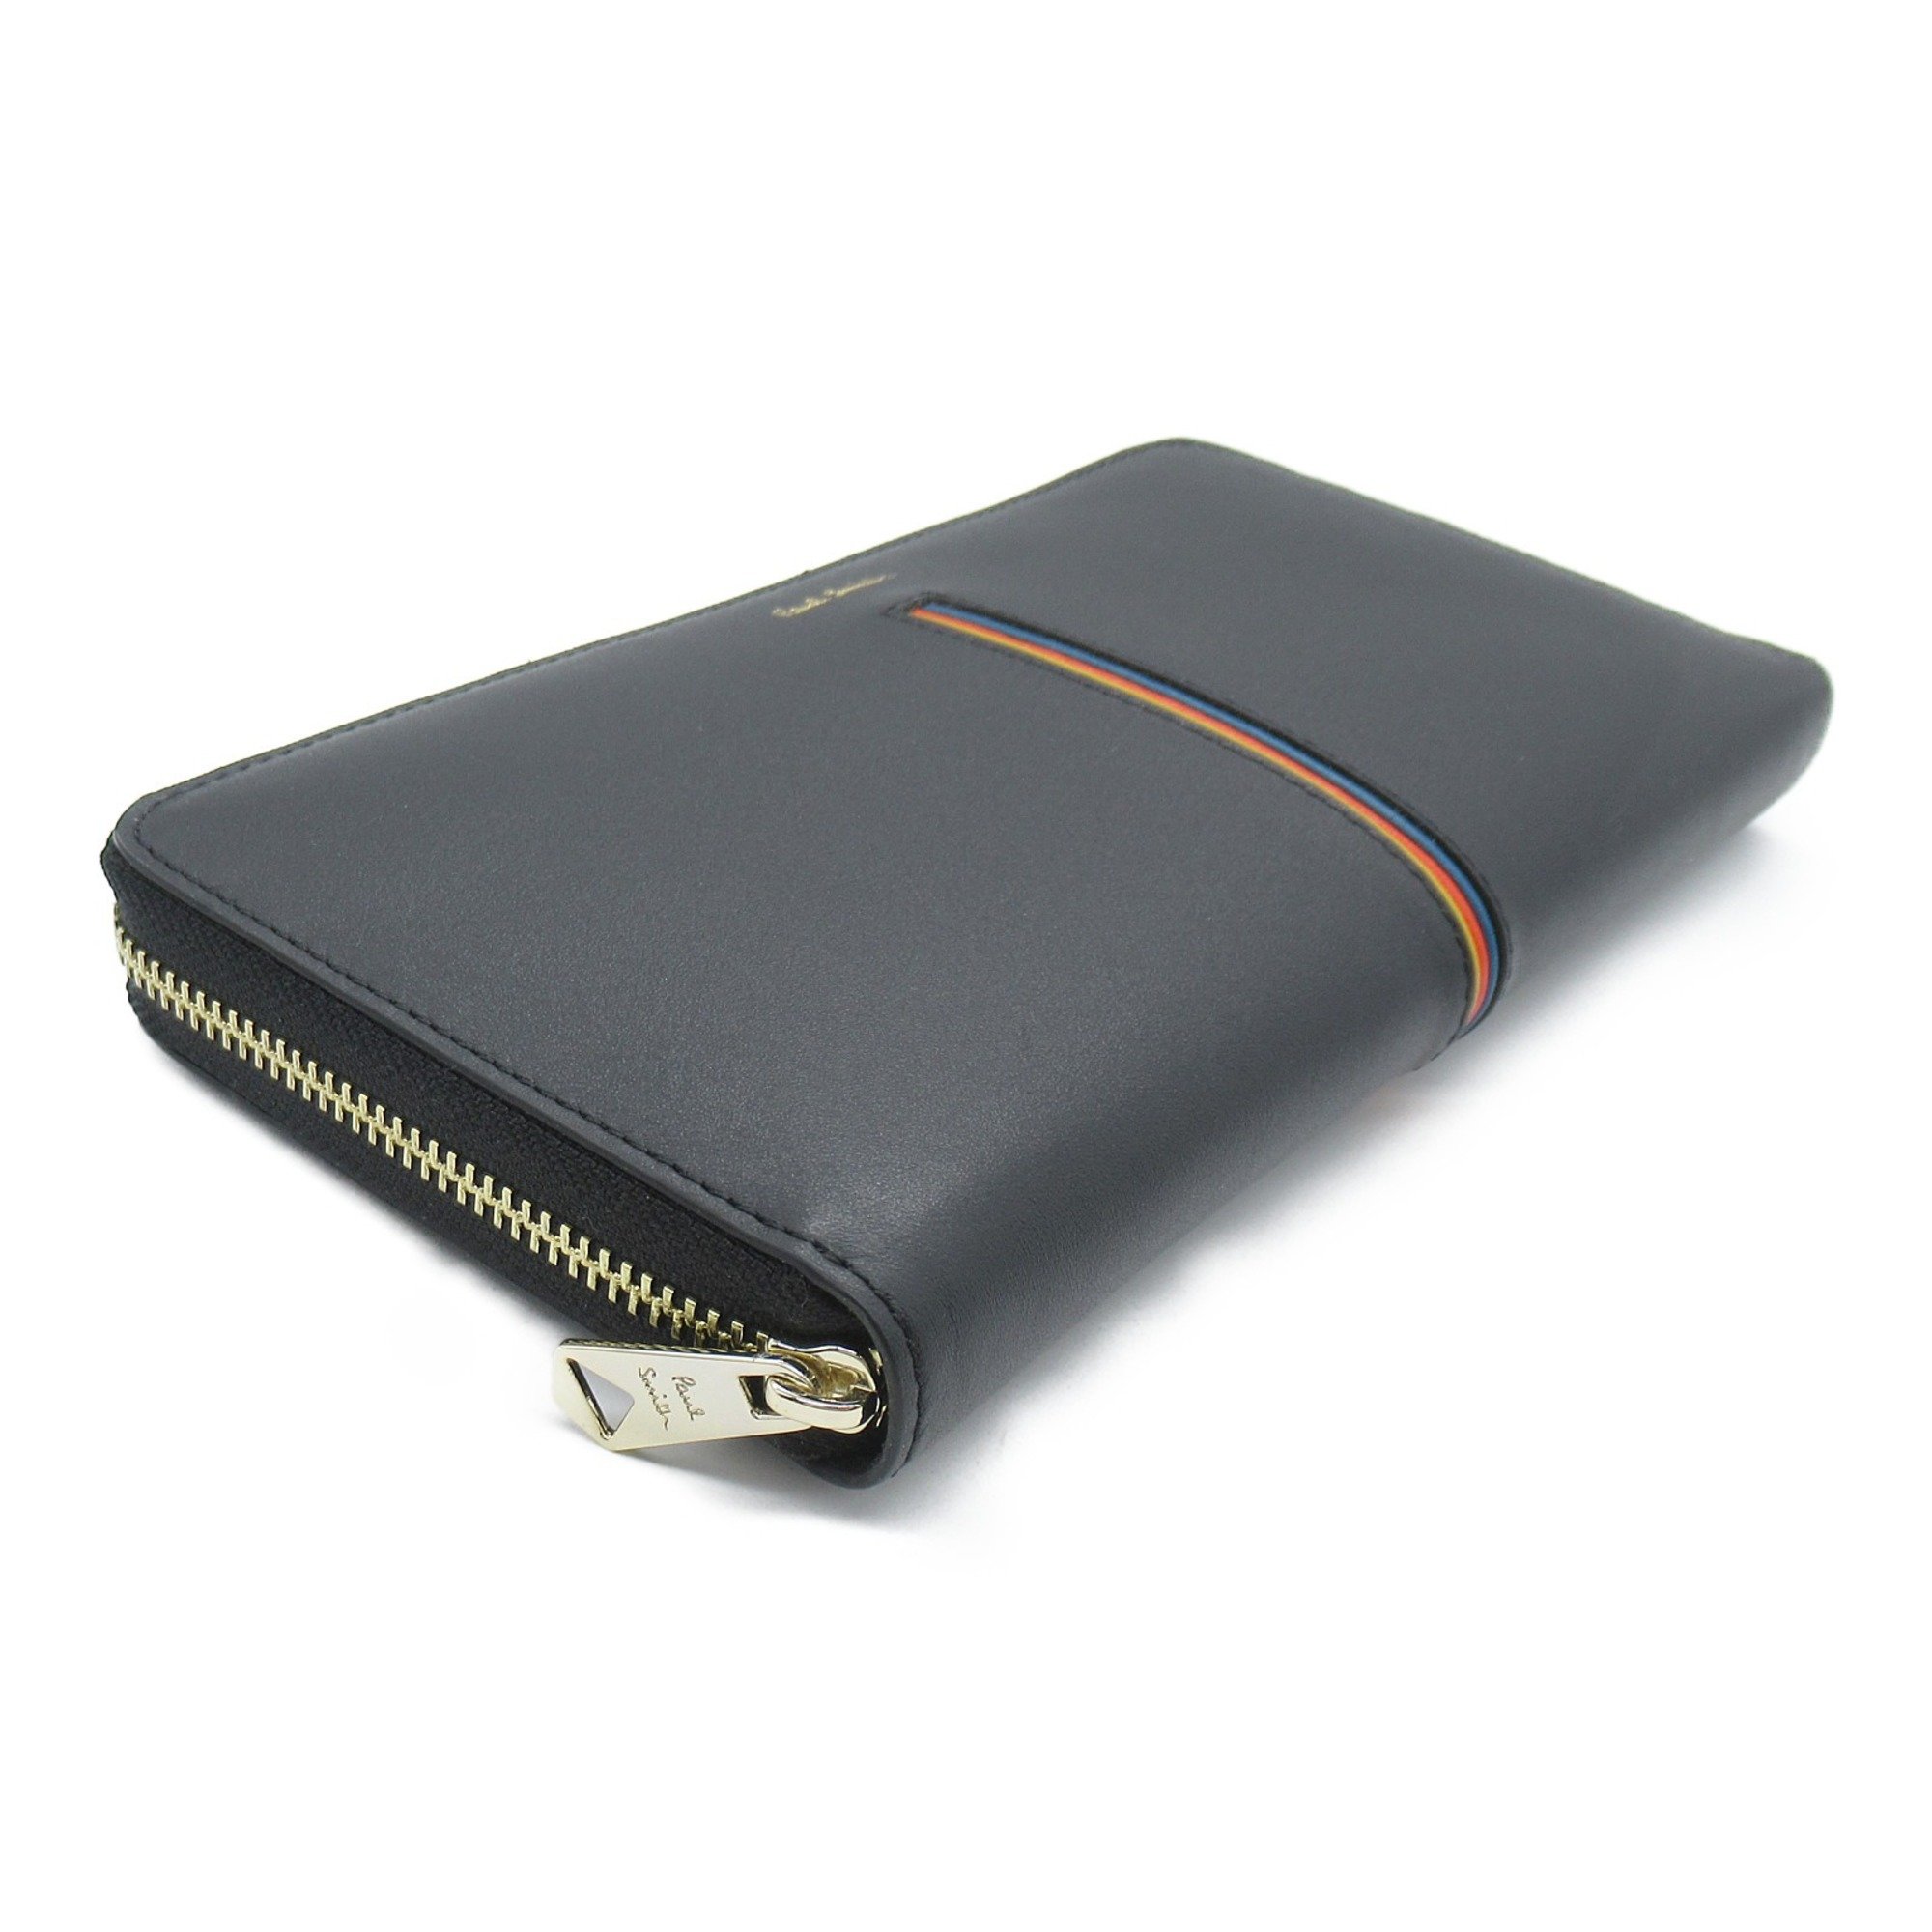 Paul Smith Round long wallet Black leather 477879